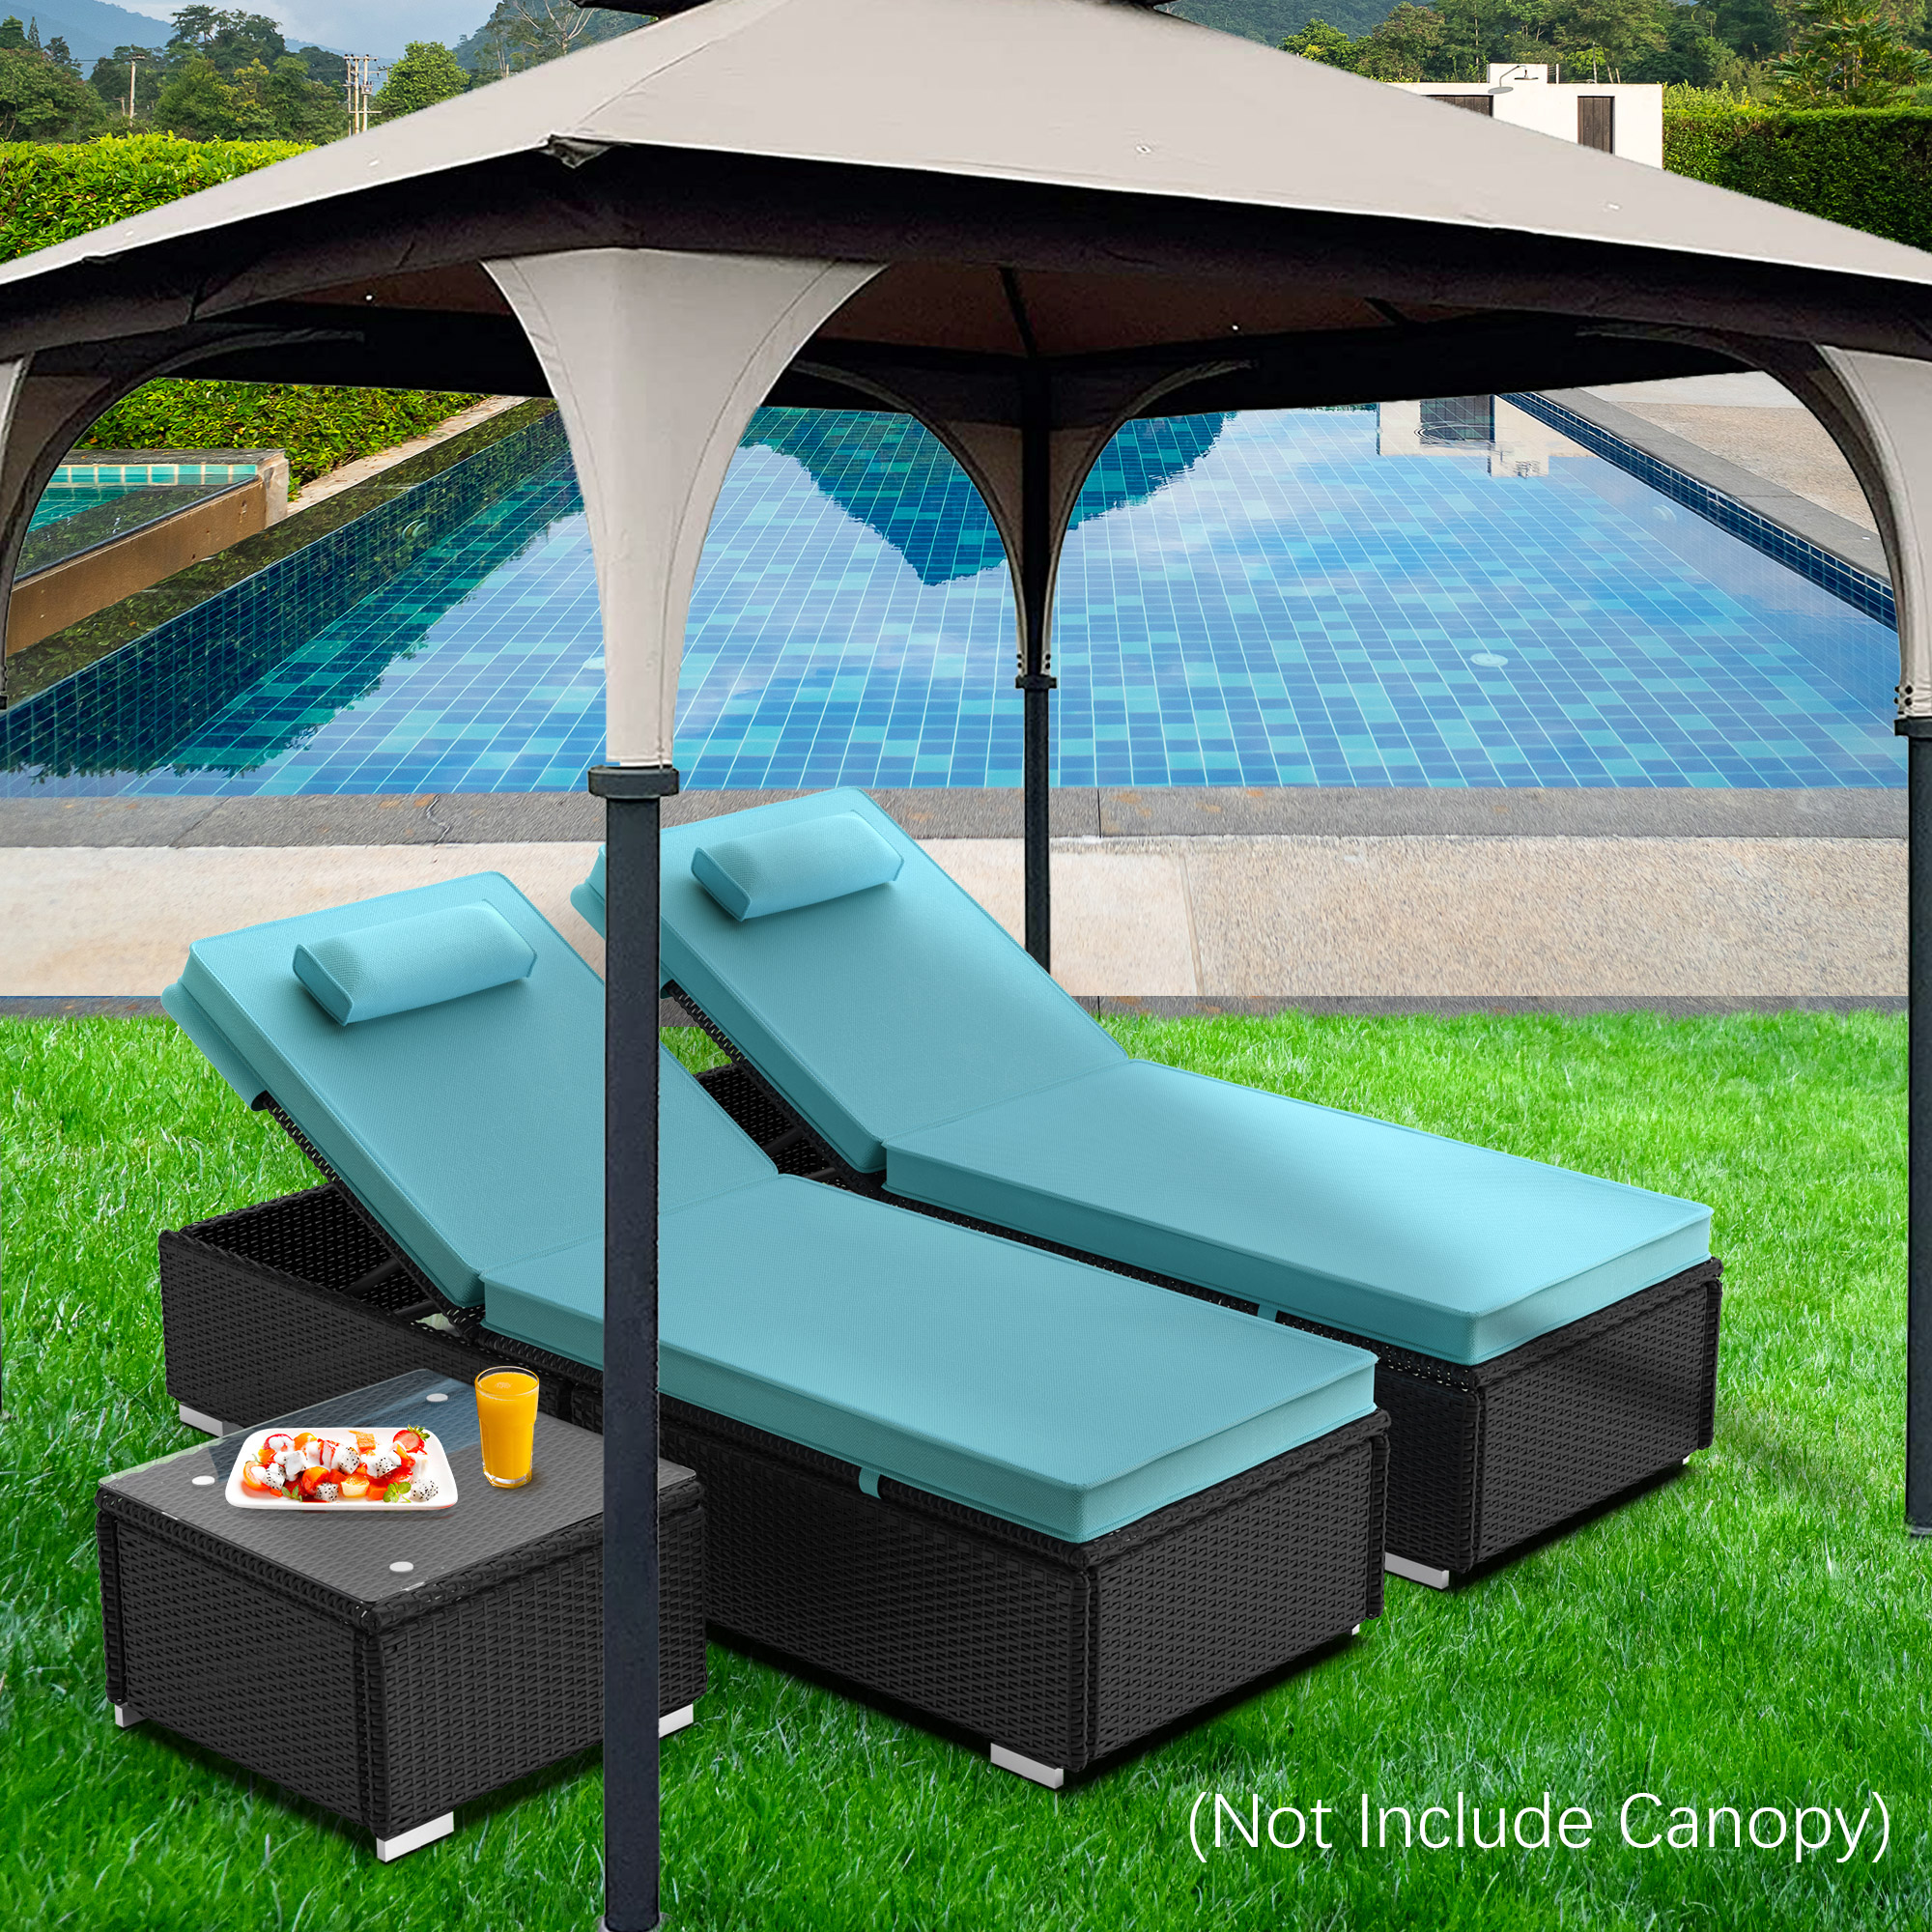 3 Pieces Wicker Chaise Lounge Furniture Set with Table & Cushions, SEGMART Outdoor Poolside Rattan Wicker Pool Chaise Lounge Chairs 2 Pillows for Backyard Deck Porch Garden, 330lbs, S1551 - image 1 of 12